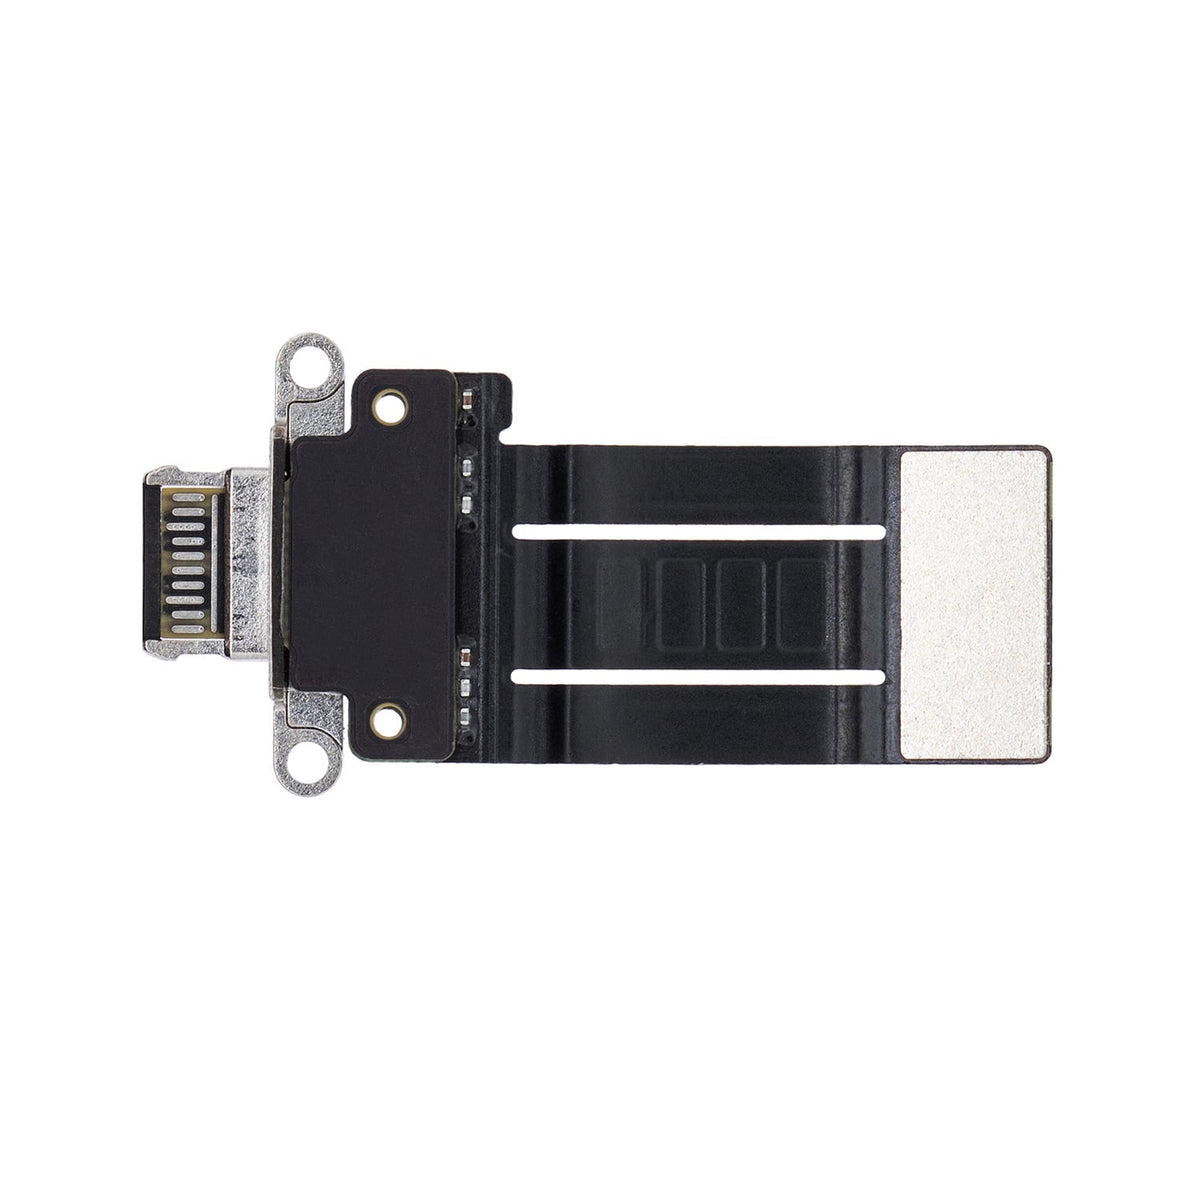 SPACE GRAY USB CHARGING CONNECTOR FLEX CABLE FOR IPAD PRO 11 3RD/12.9 5TH